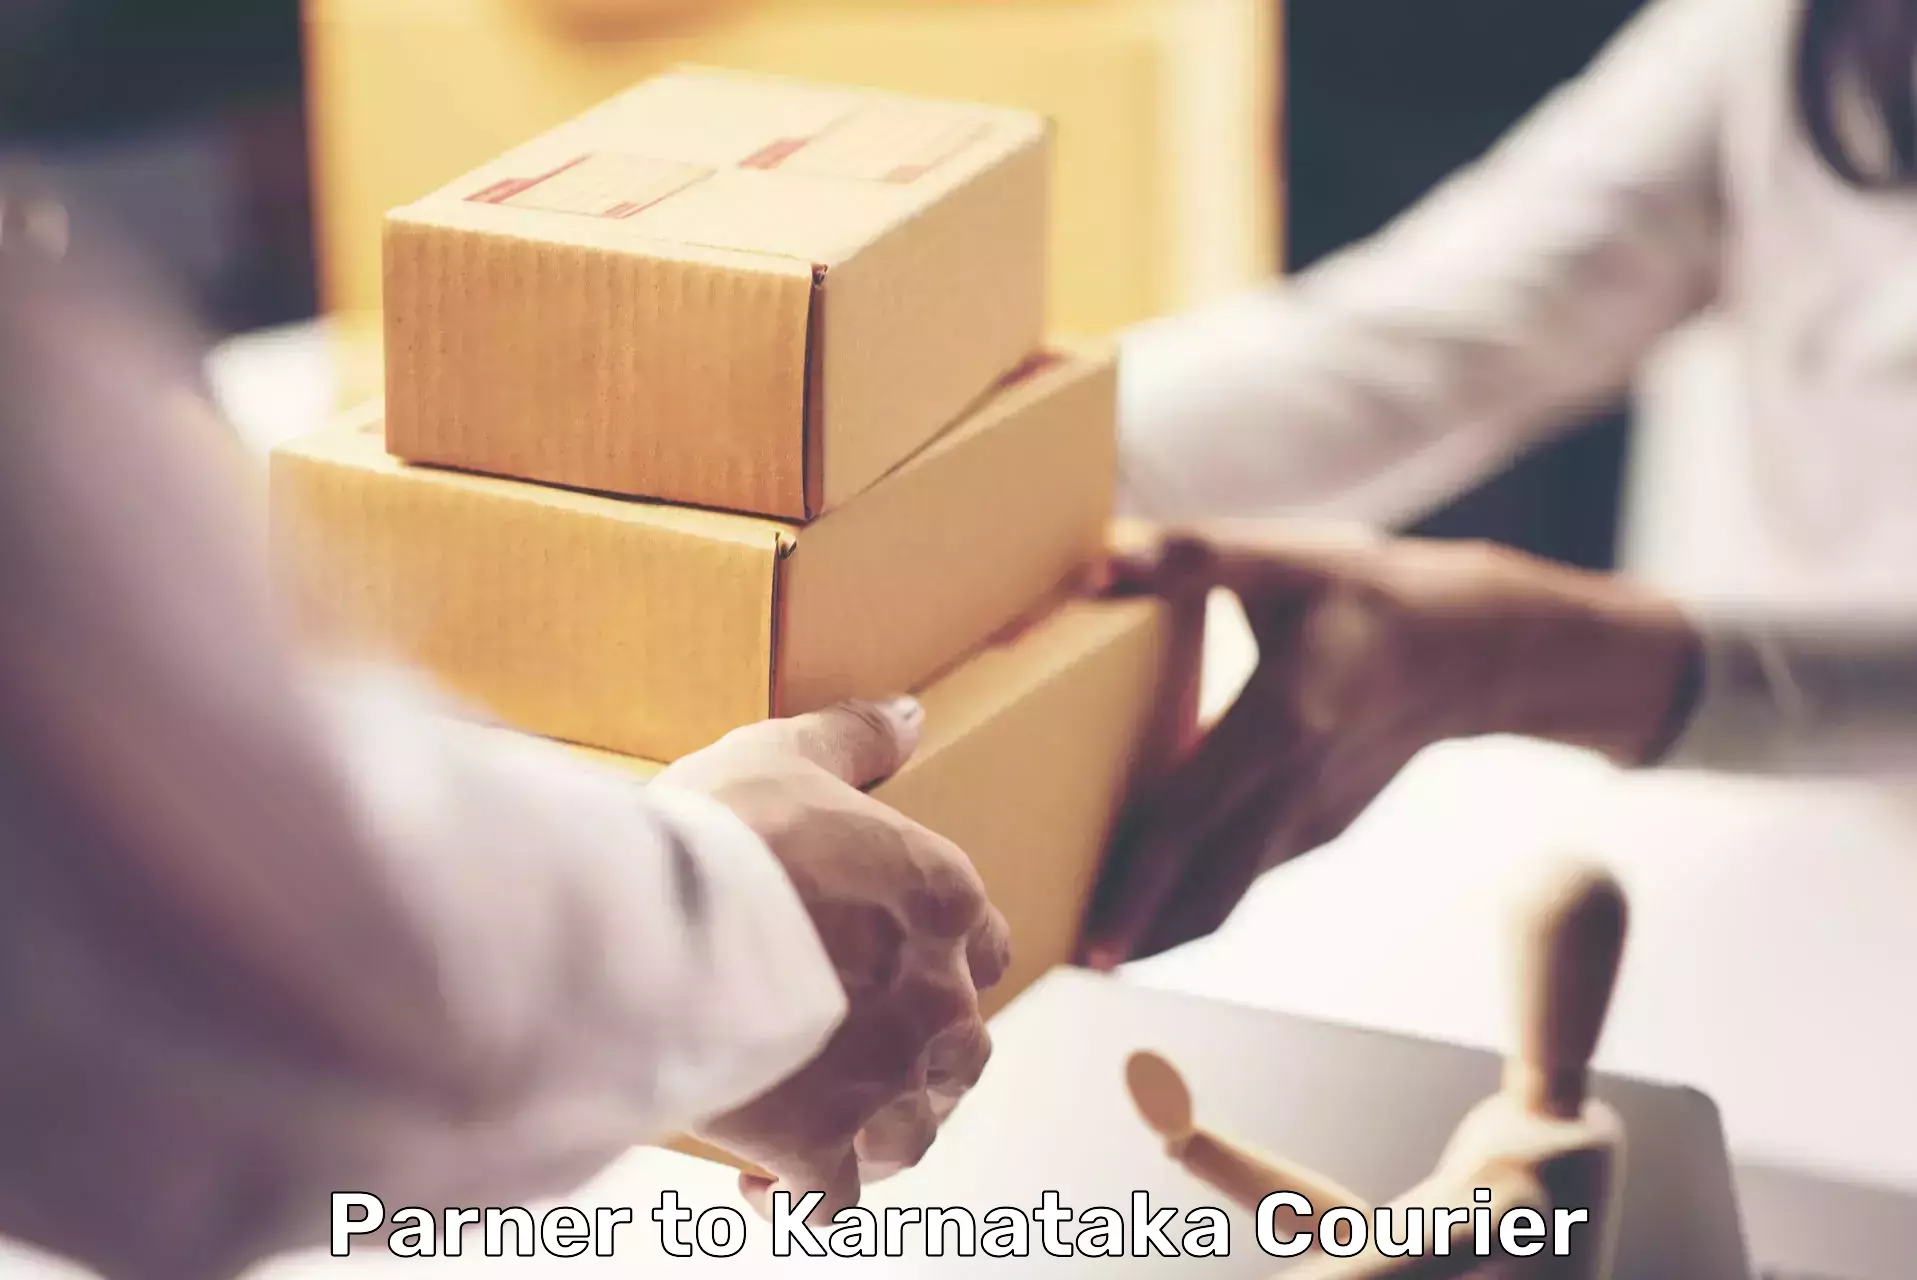 Reliable delivery network Parner to Karnataka